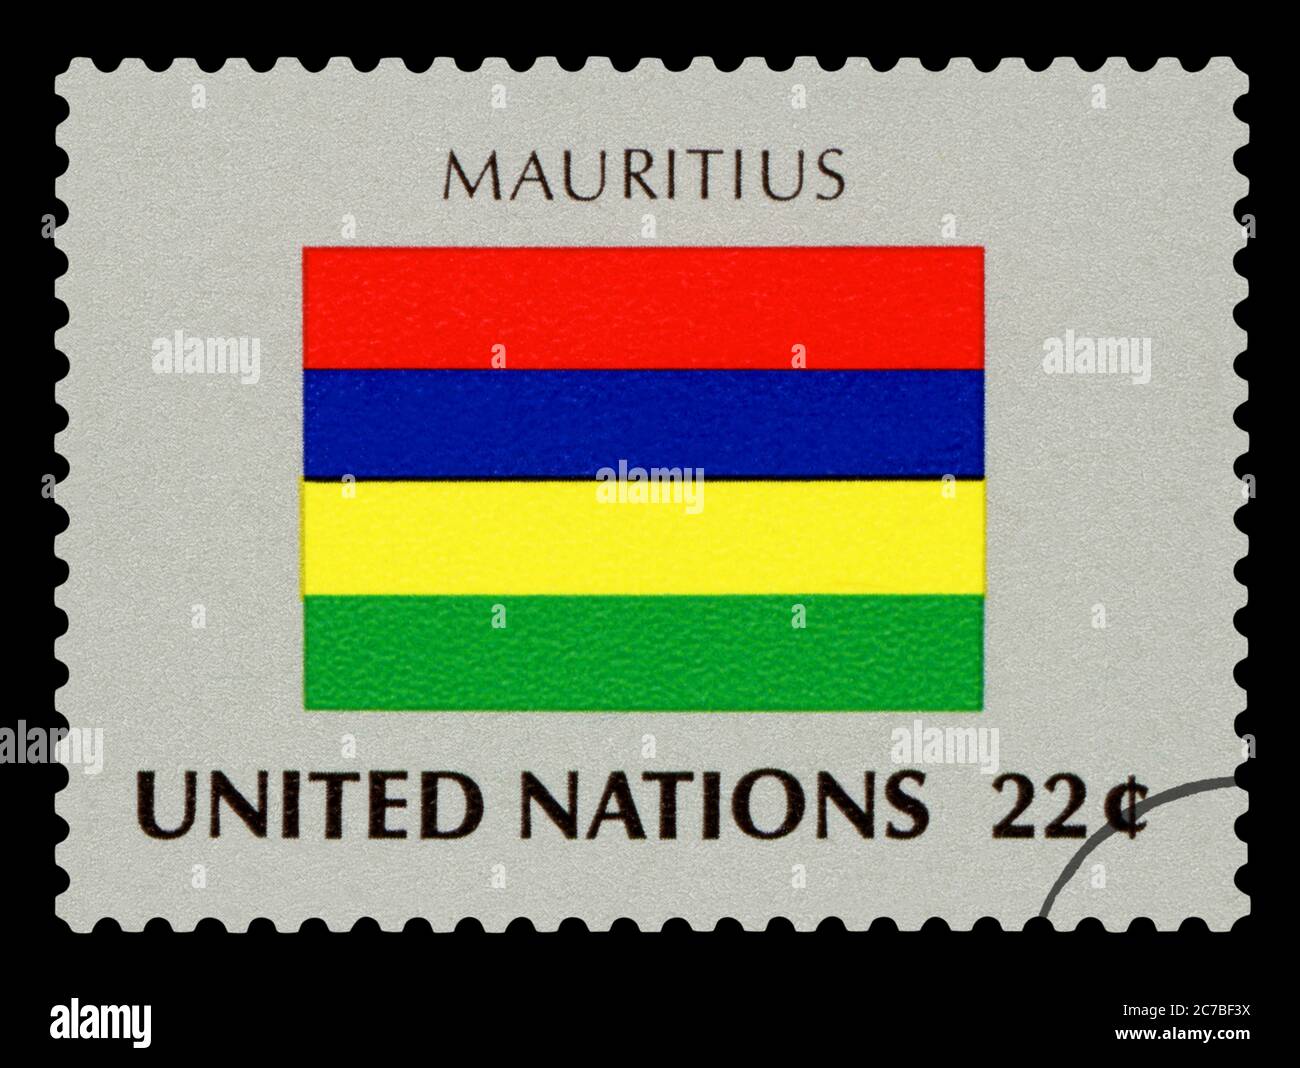 MAURITIUS - Postage Stamp of Mauritius national flag, Series of United Nations, circa 1984. Isolated on black background. Stock Photo